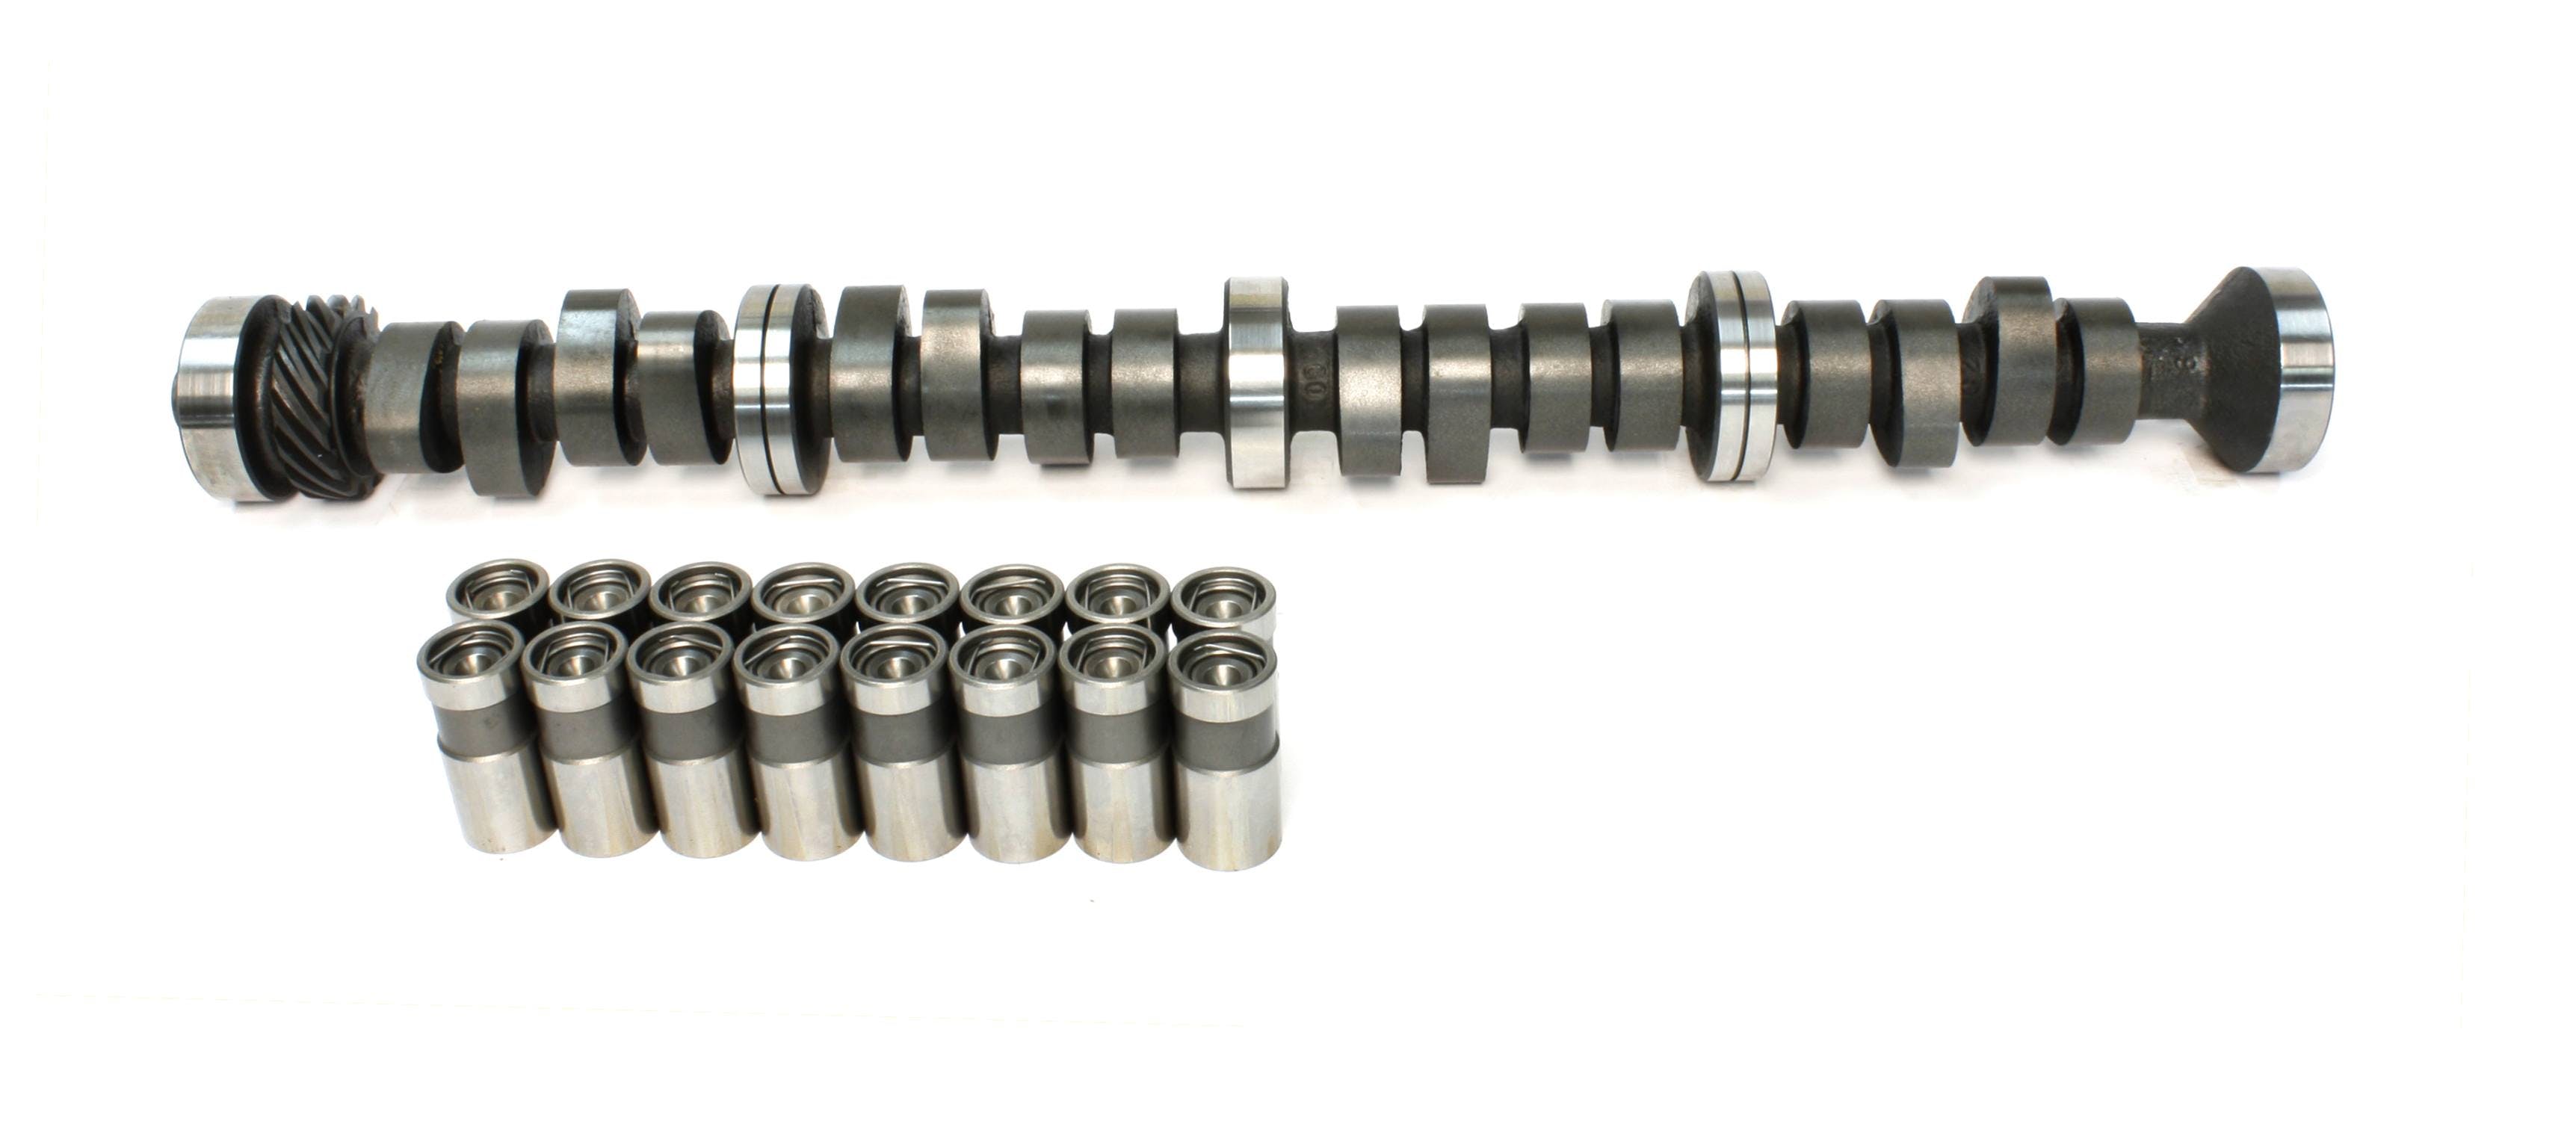 Competition Cams CL33-224-3 High Energy Camshaft/Lifter Kit